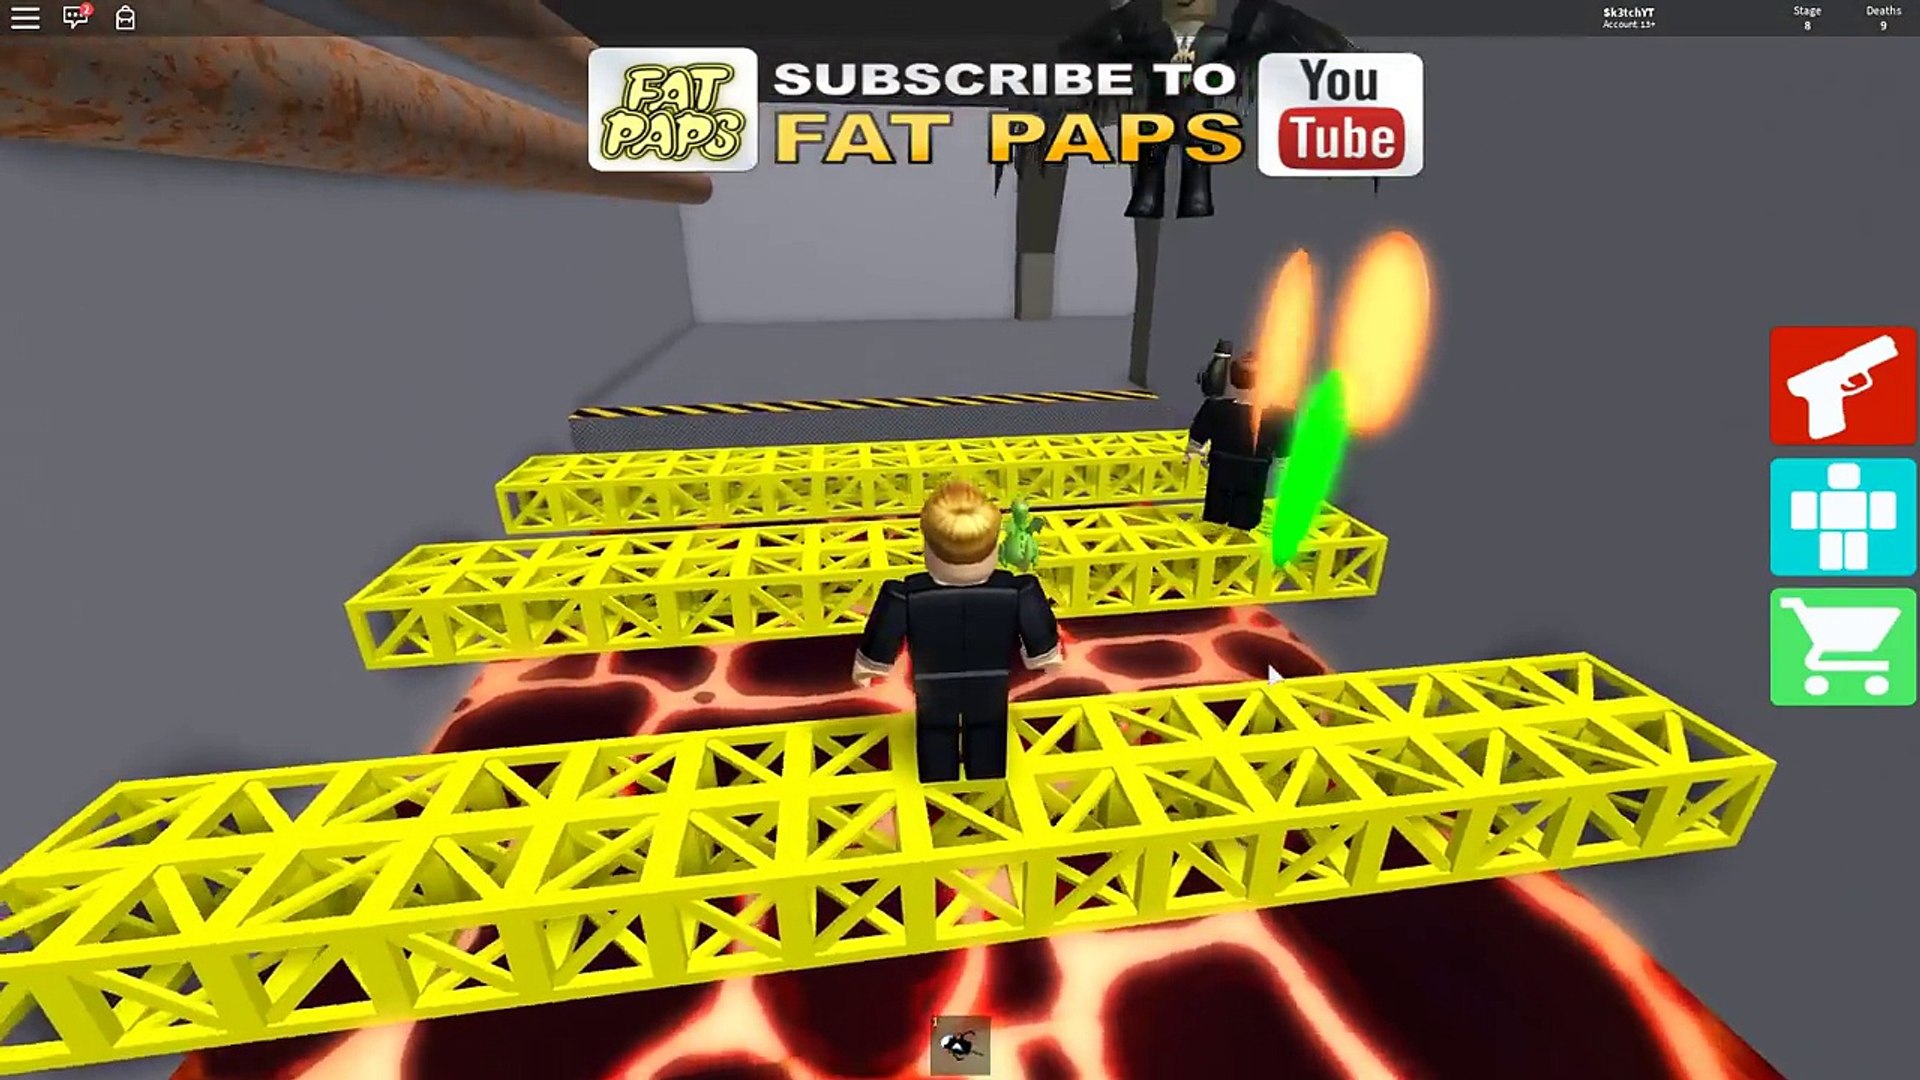 Roblox Adventures Cut In Half By A Laser In Roblox Become A Spy - roblox sk3tchyt sketch youtube